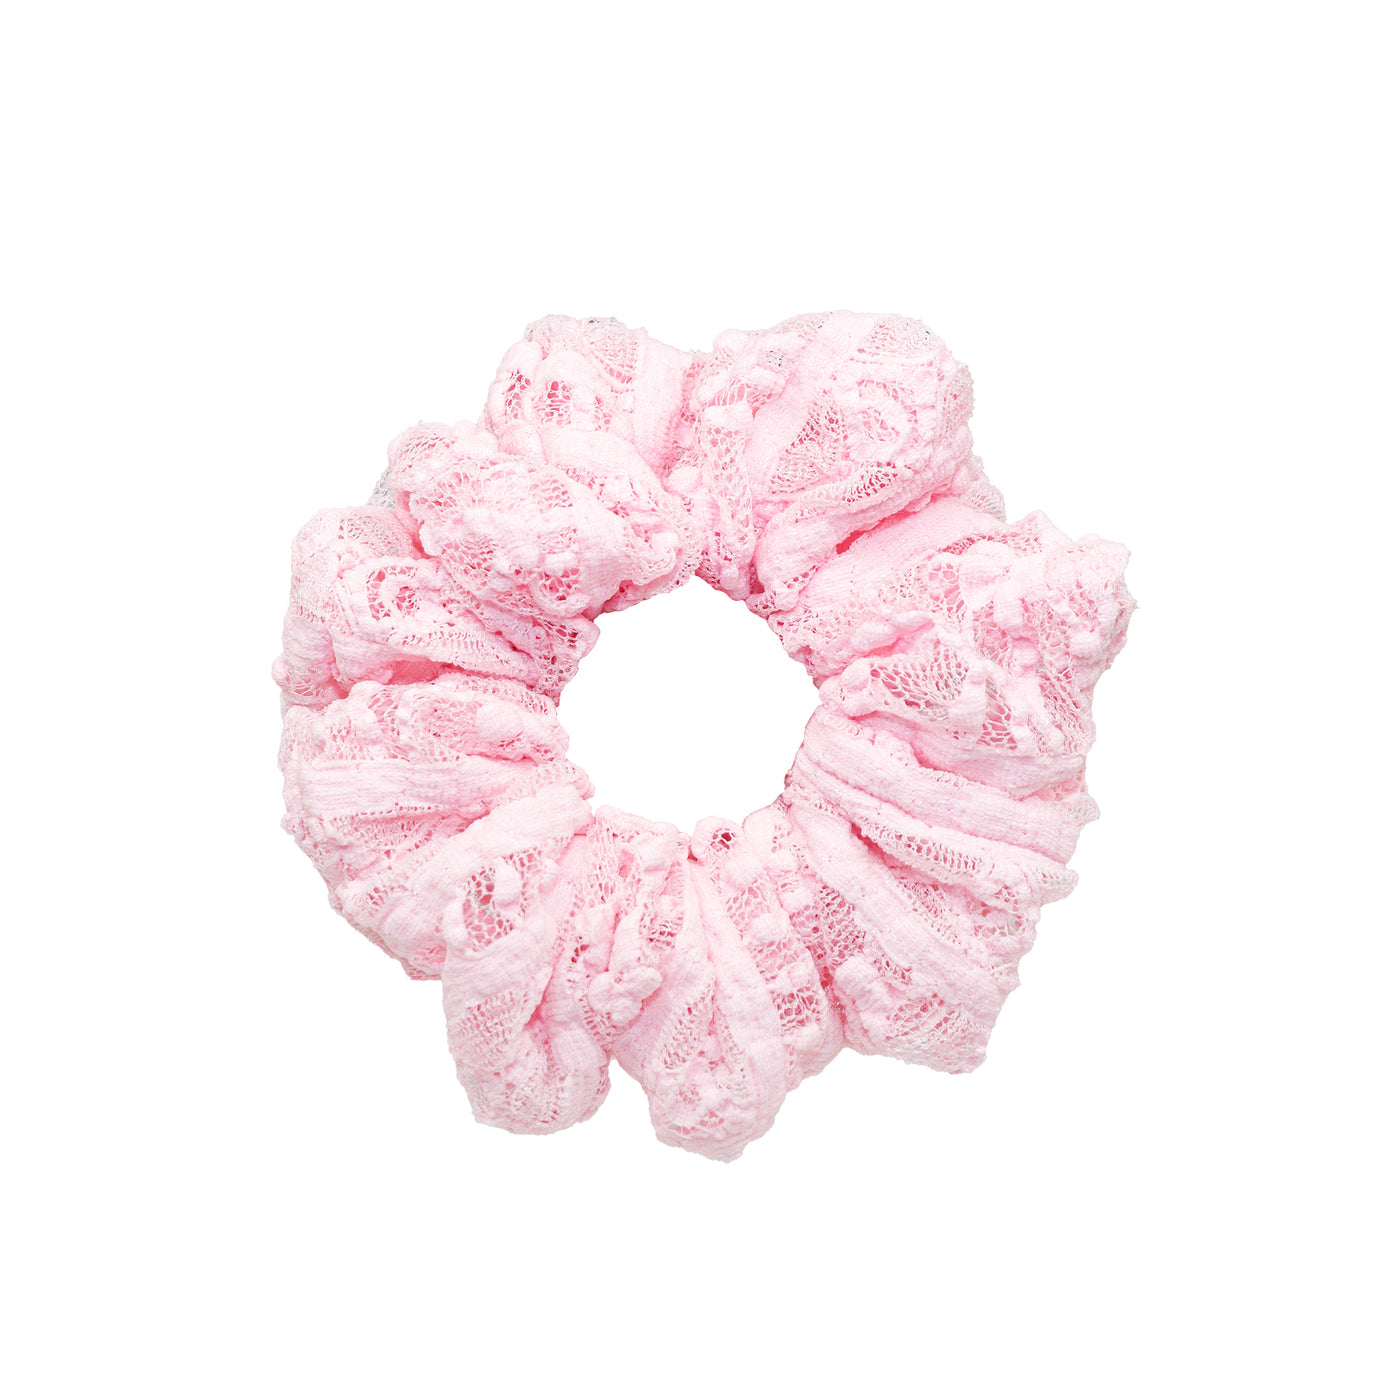 Lace Stretchy Scrunchie in Peony